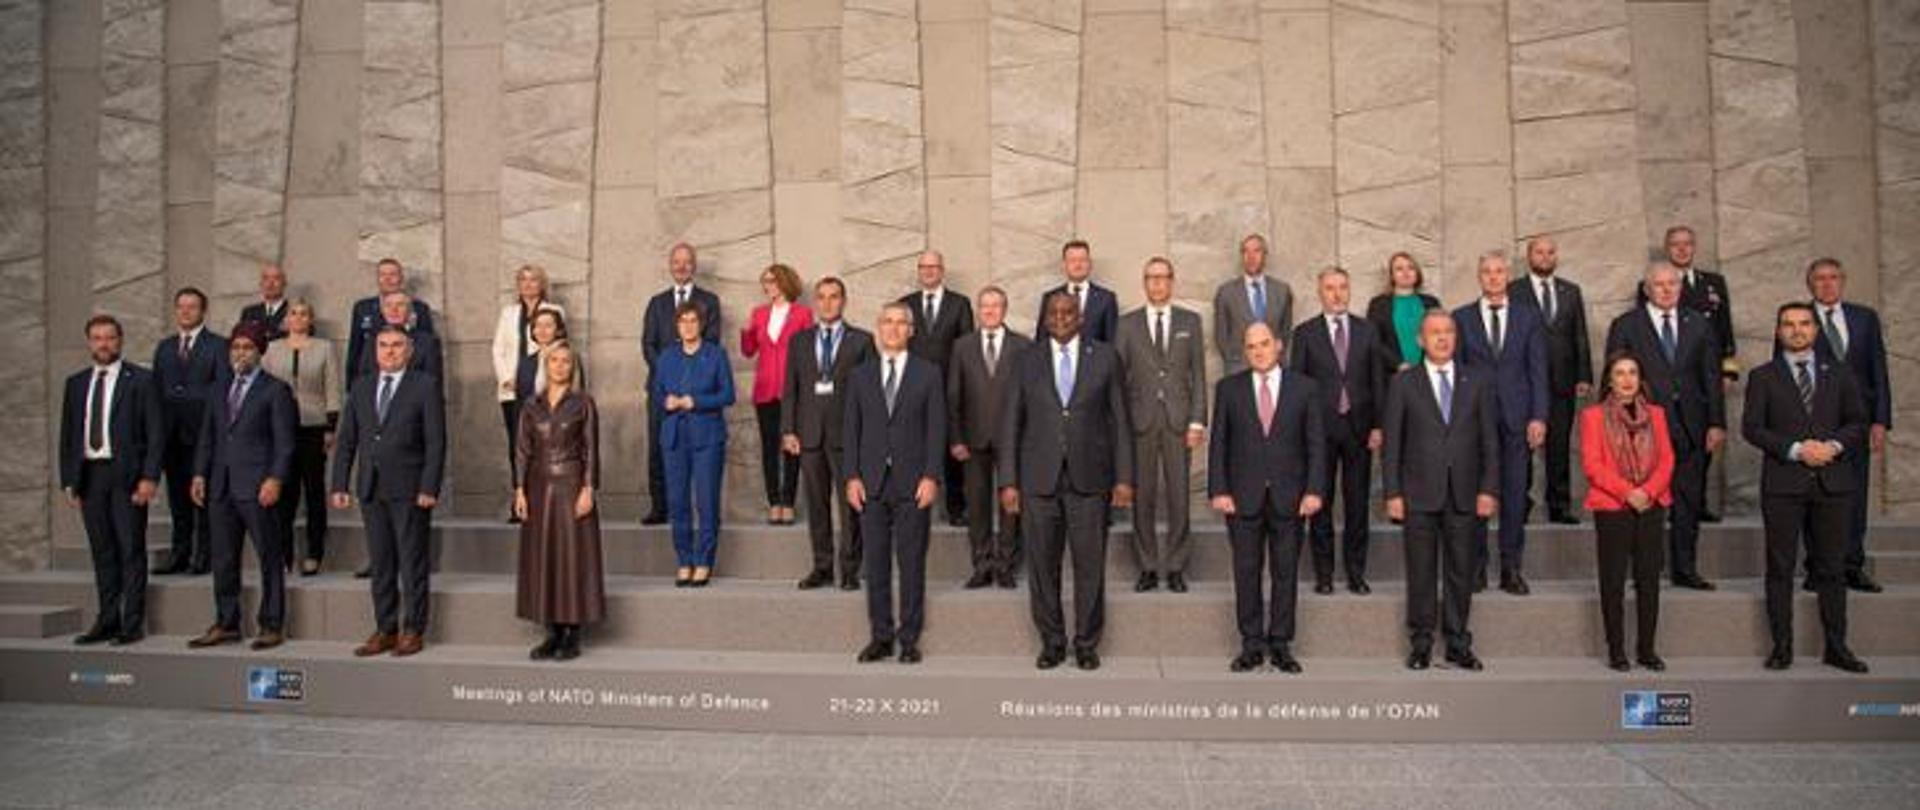 Meeting_of_NATO_defence_ministers5a